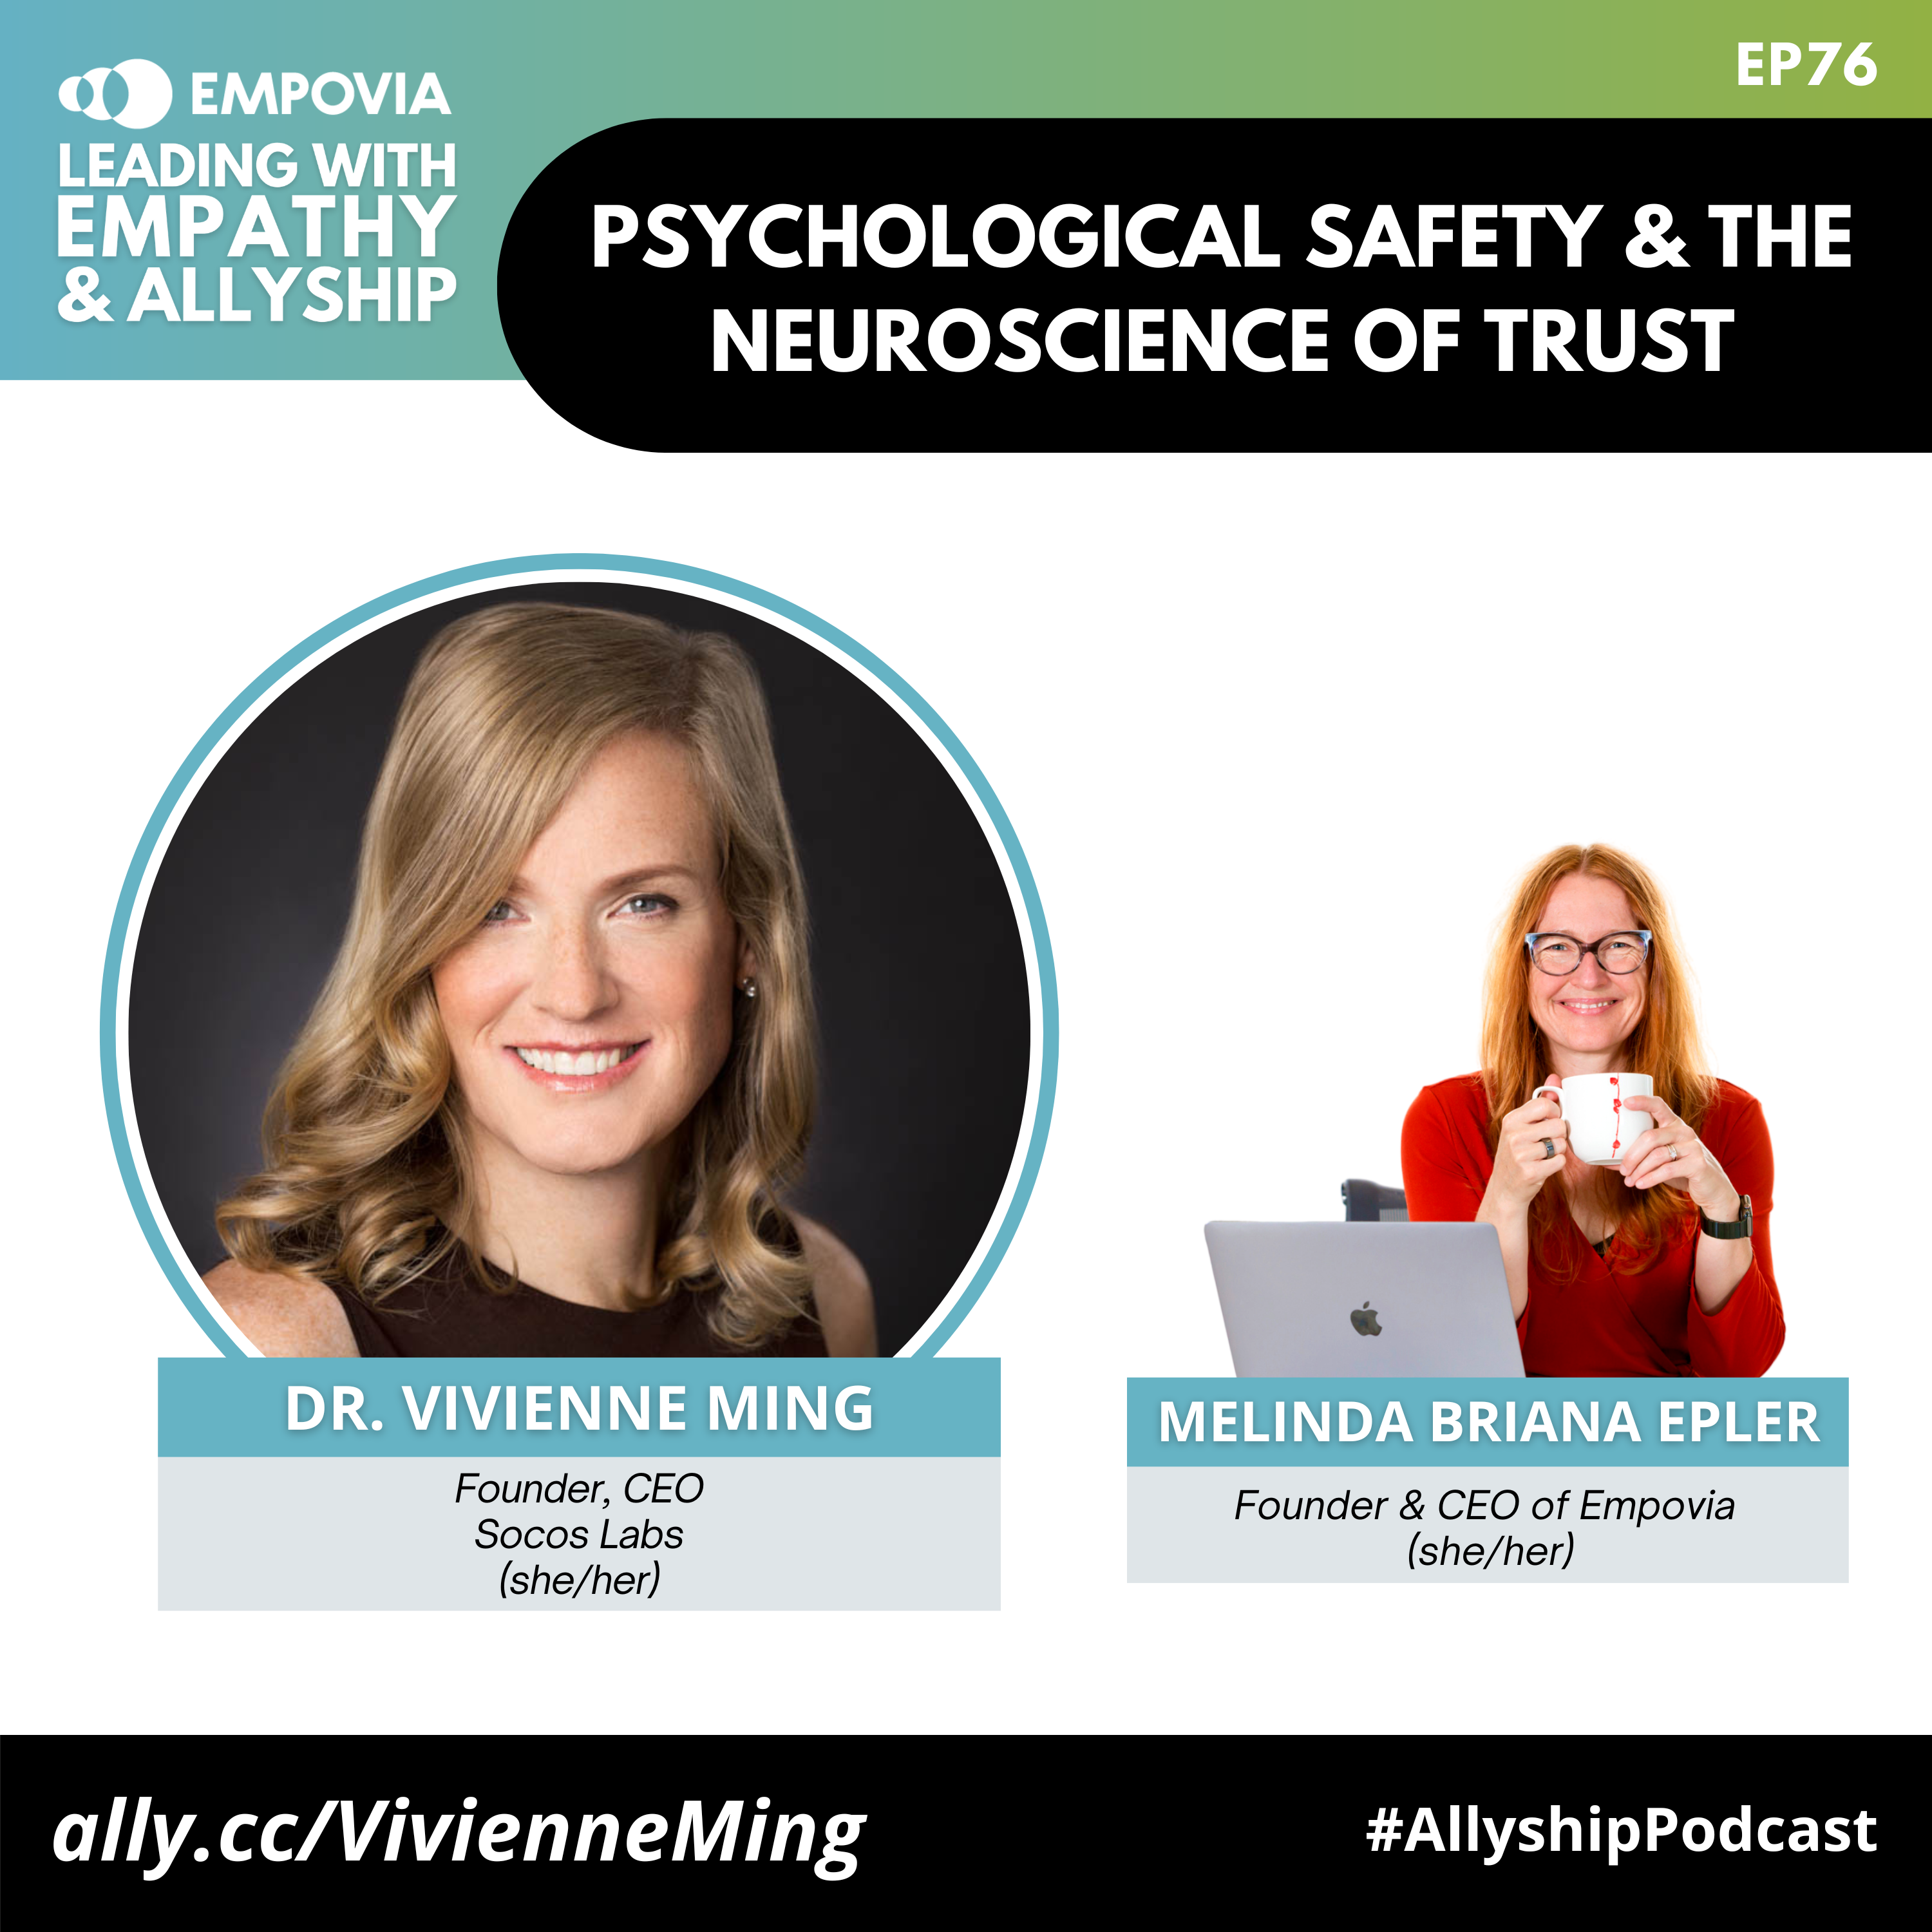 Leading With Empathy & Allyship promo with the Empovia logo and photos of Dr. Vivienne Ming, a White trans female with shoulder-length blonde hair, who is wearing a black sleeveless blouse and smiling at the camera, and host Melinda Briana Epler, a White woman with red hair, glasses, and an orange shirt holding a white mug behind a laptop.